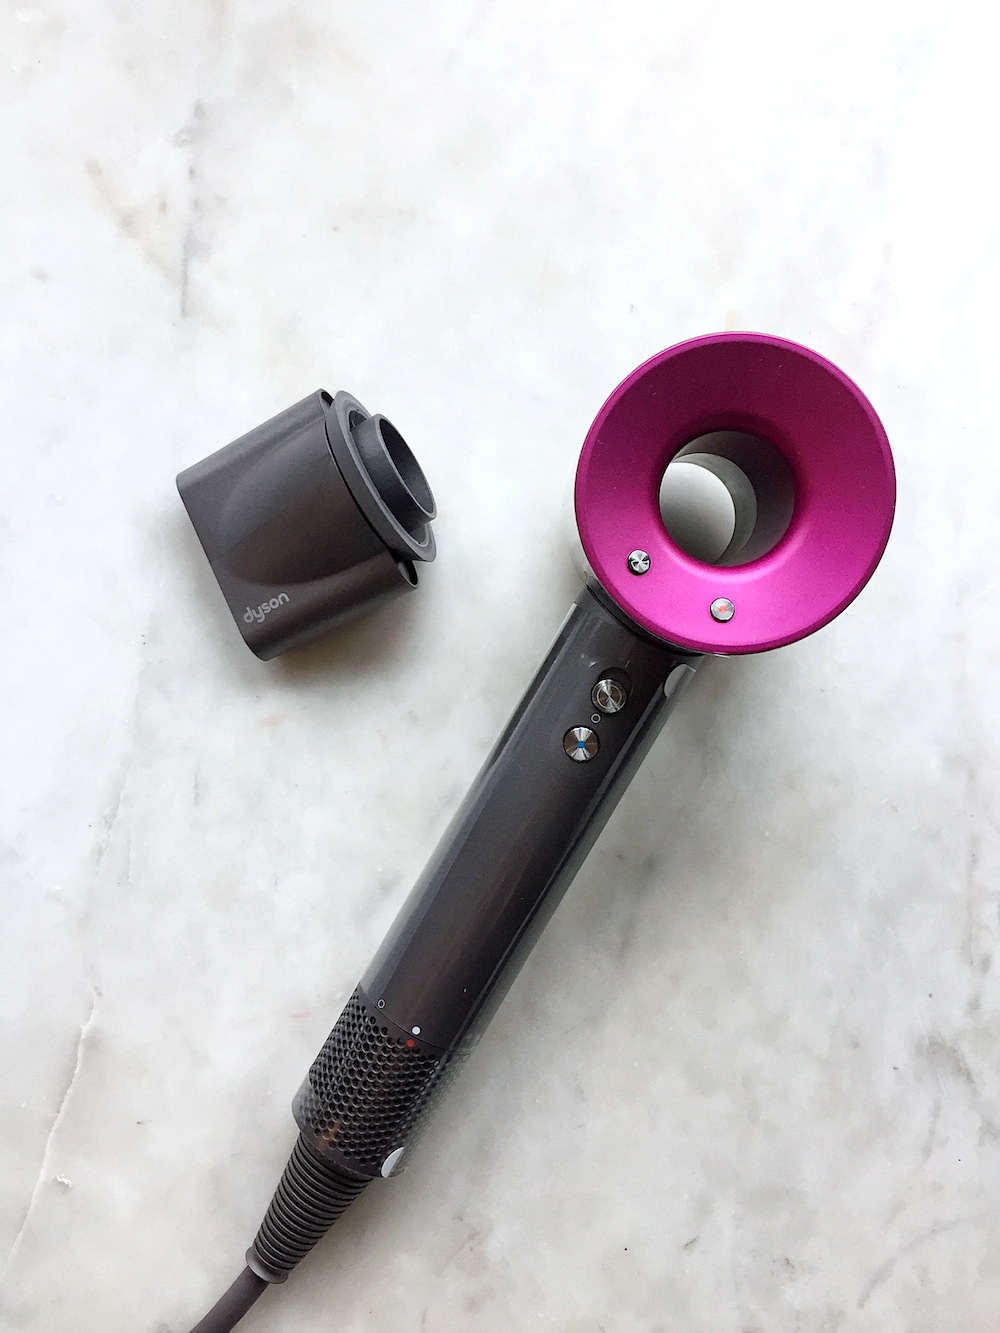 Dyson Supersonic Hair Dryer: A quick review